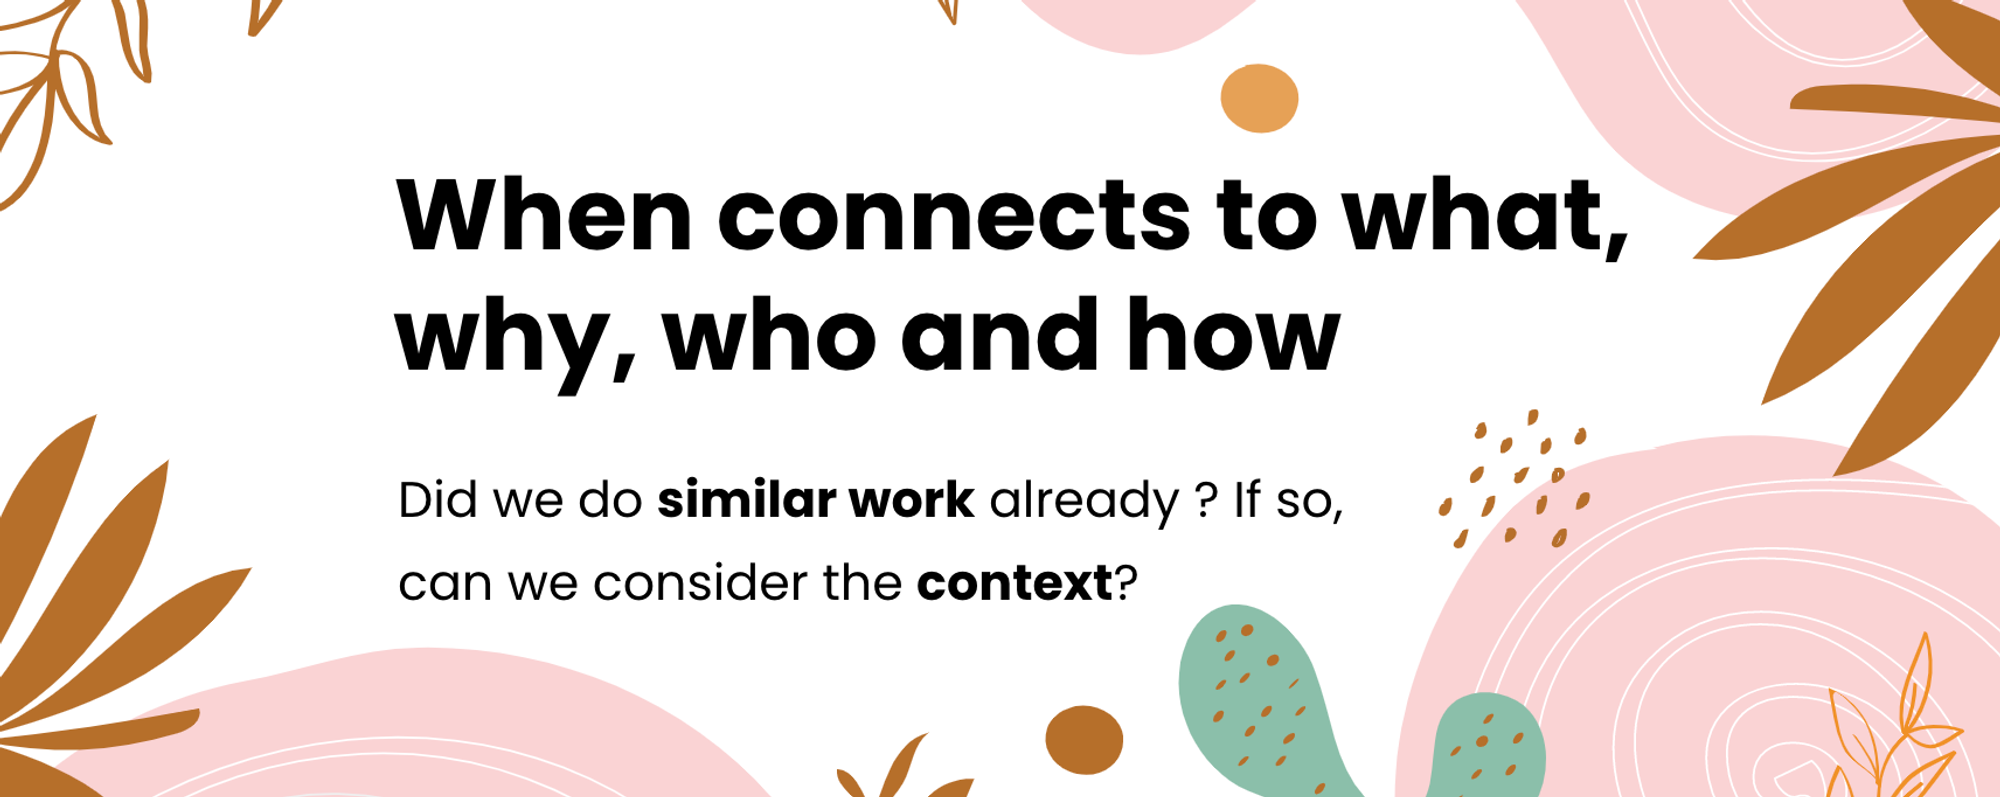 These are the next steps. When connects to what, why, who and how. Did we do similar work already? If so, can we consider the context?